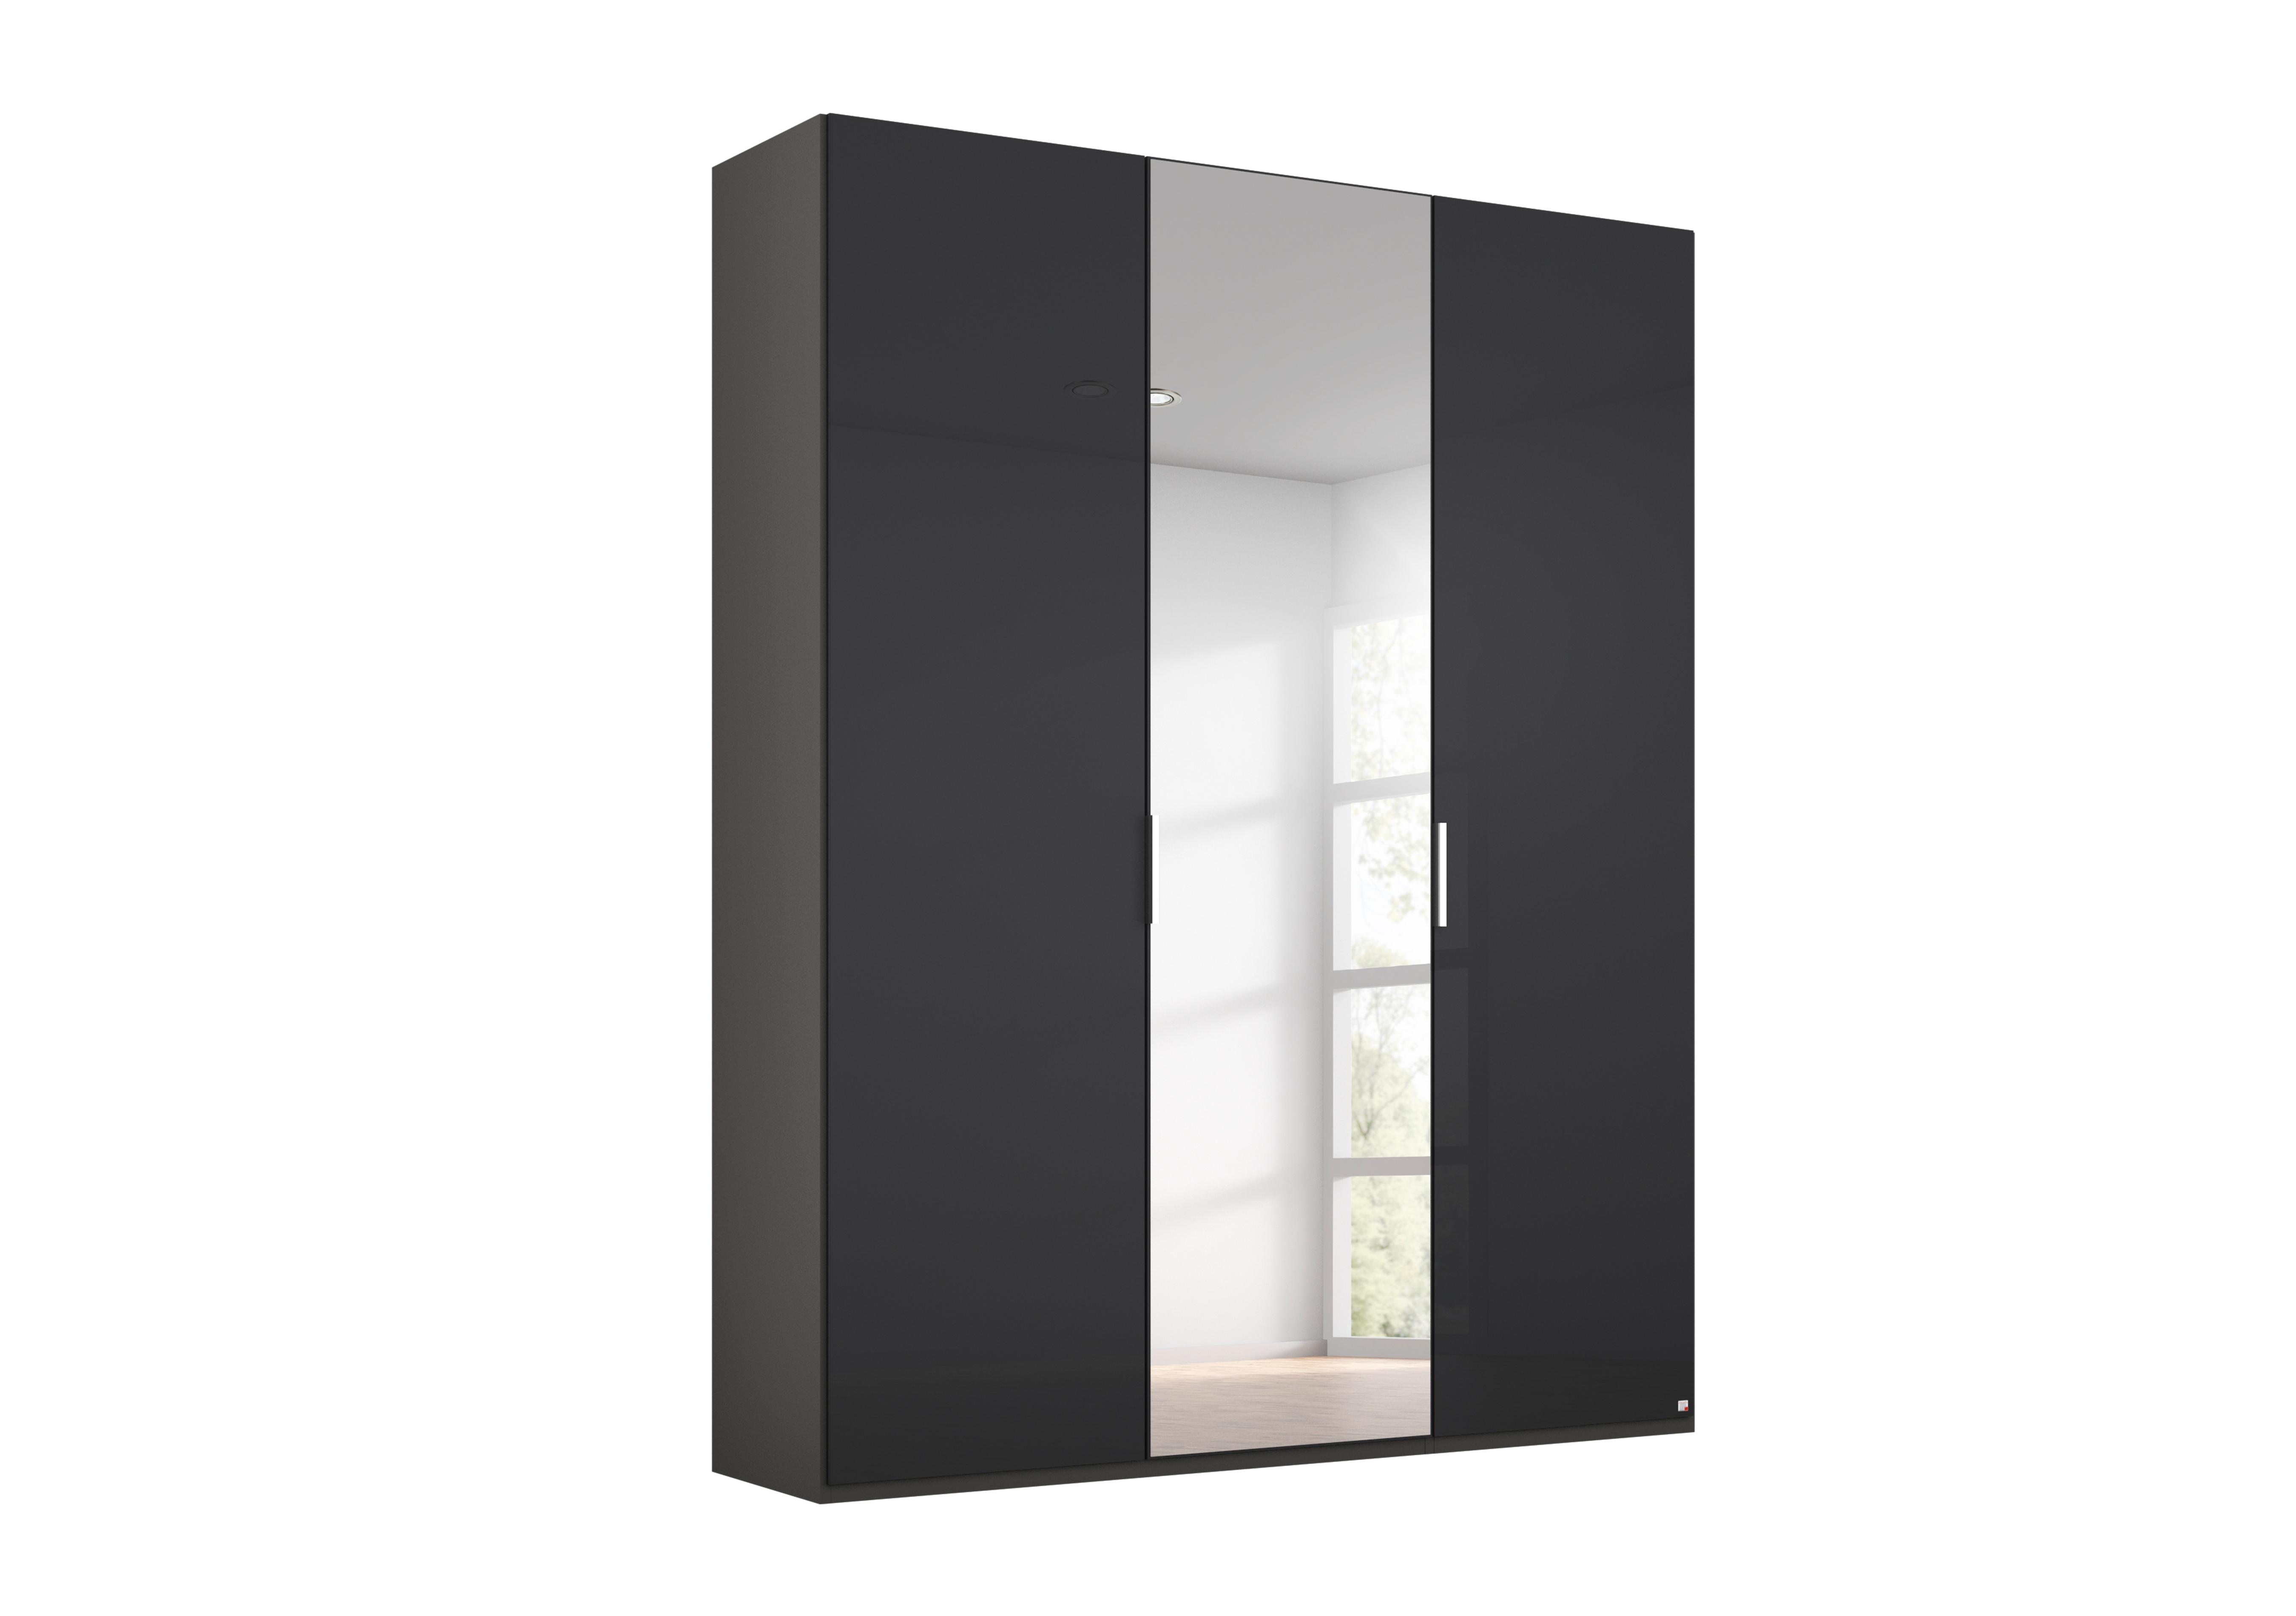 Formes Glass 3 Door Hinged Wardrobe with 1 Mirror in A140b Graphite Basalt Front on Furniture Village